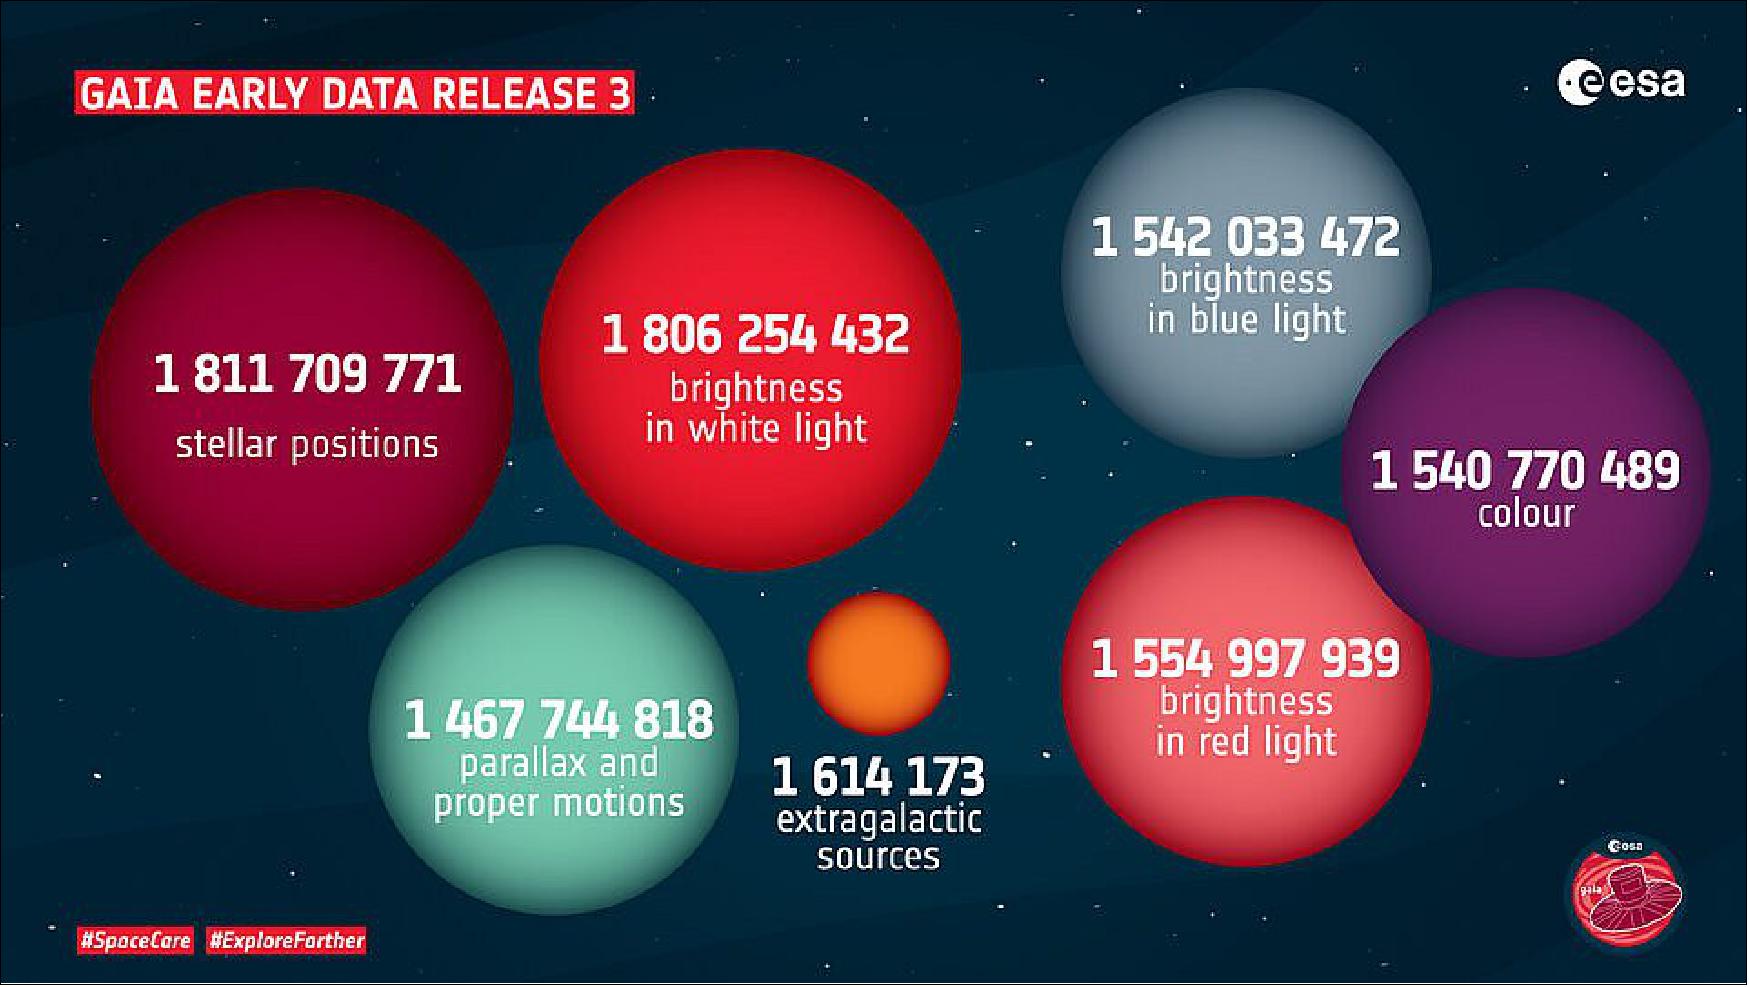 Figure 47: Gaia’s Early Data Release 3 was made public on 3 December 2020. It contains detailed information on more than 1.8 billion sources, as measured by the Gaia spacecraft. This represents an increase of more than 100 million sources over the previous data release (Gaia DR2), which was made public in April 2018. Gaia EDR3 also contains color information for around 1.5 billion sources, an increase of about 200 million sources over Gaia DR2. As well as including more sources, the general accuracy and precision of the measurements has also improved (image credit: ESA; CC BY-SA 3.0 IGO)